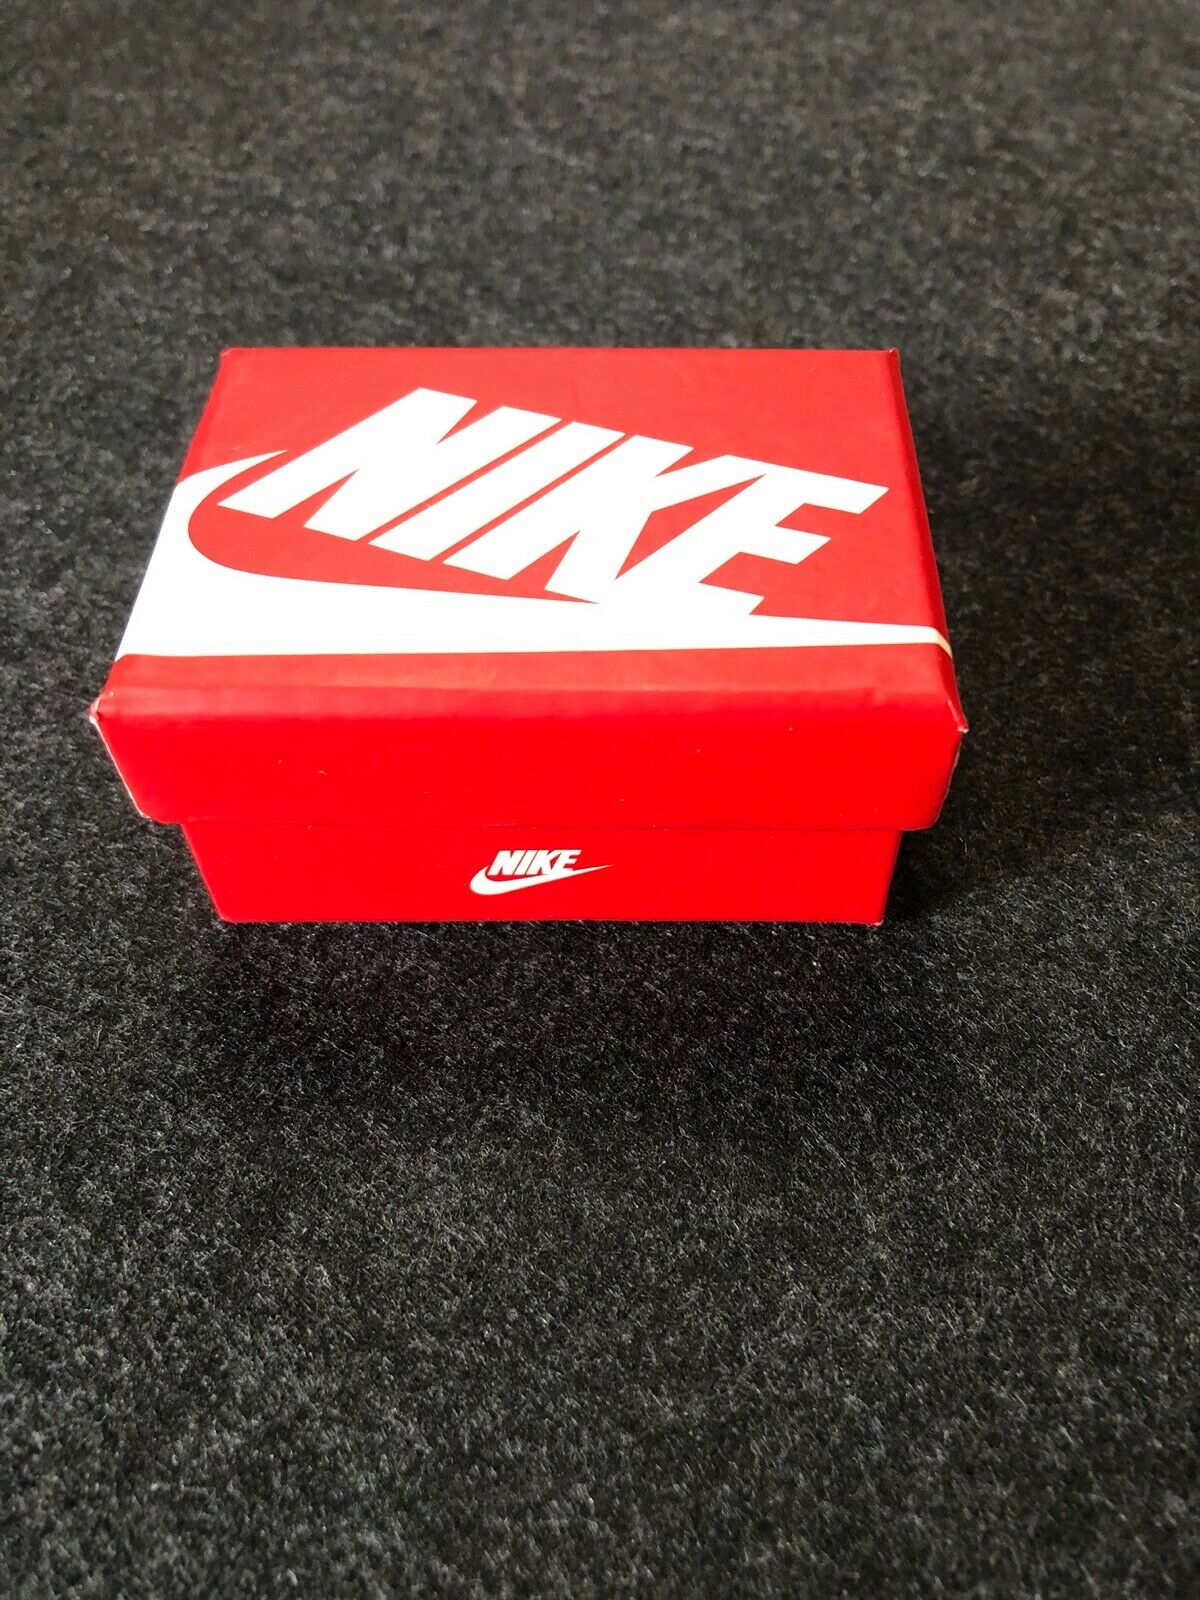 New Mini ~~NIKE ~ SHOEBOX ~~ for collectible sneaker shoes keychain RED